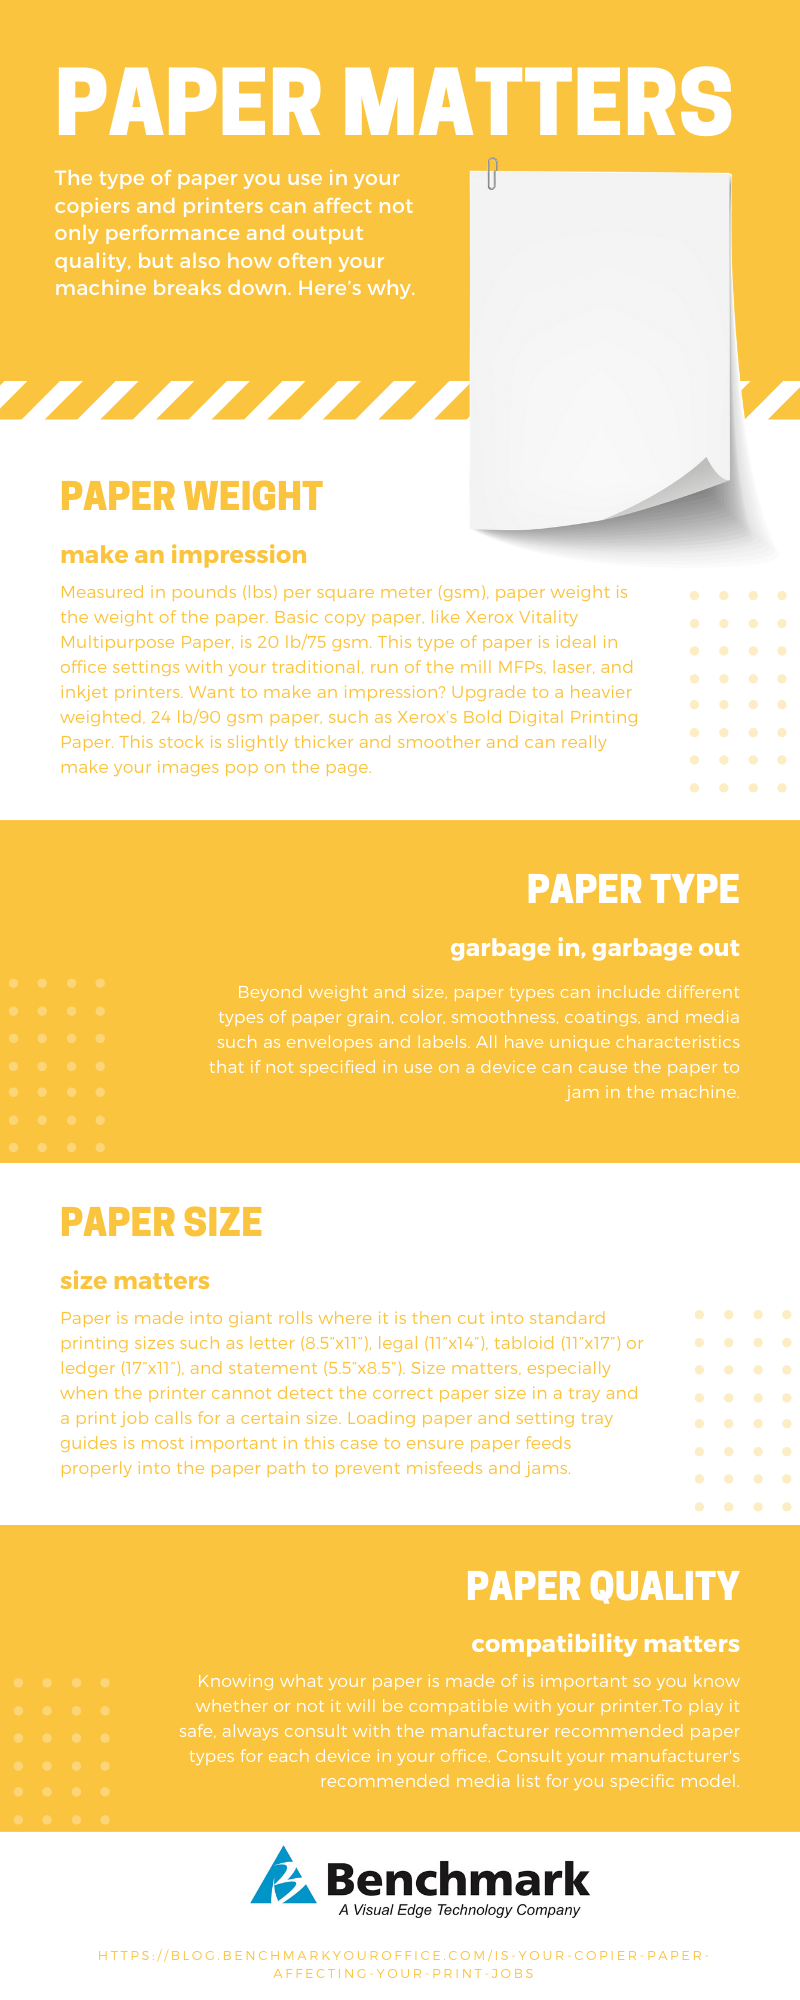 PaperMatters_Infographic